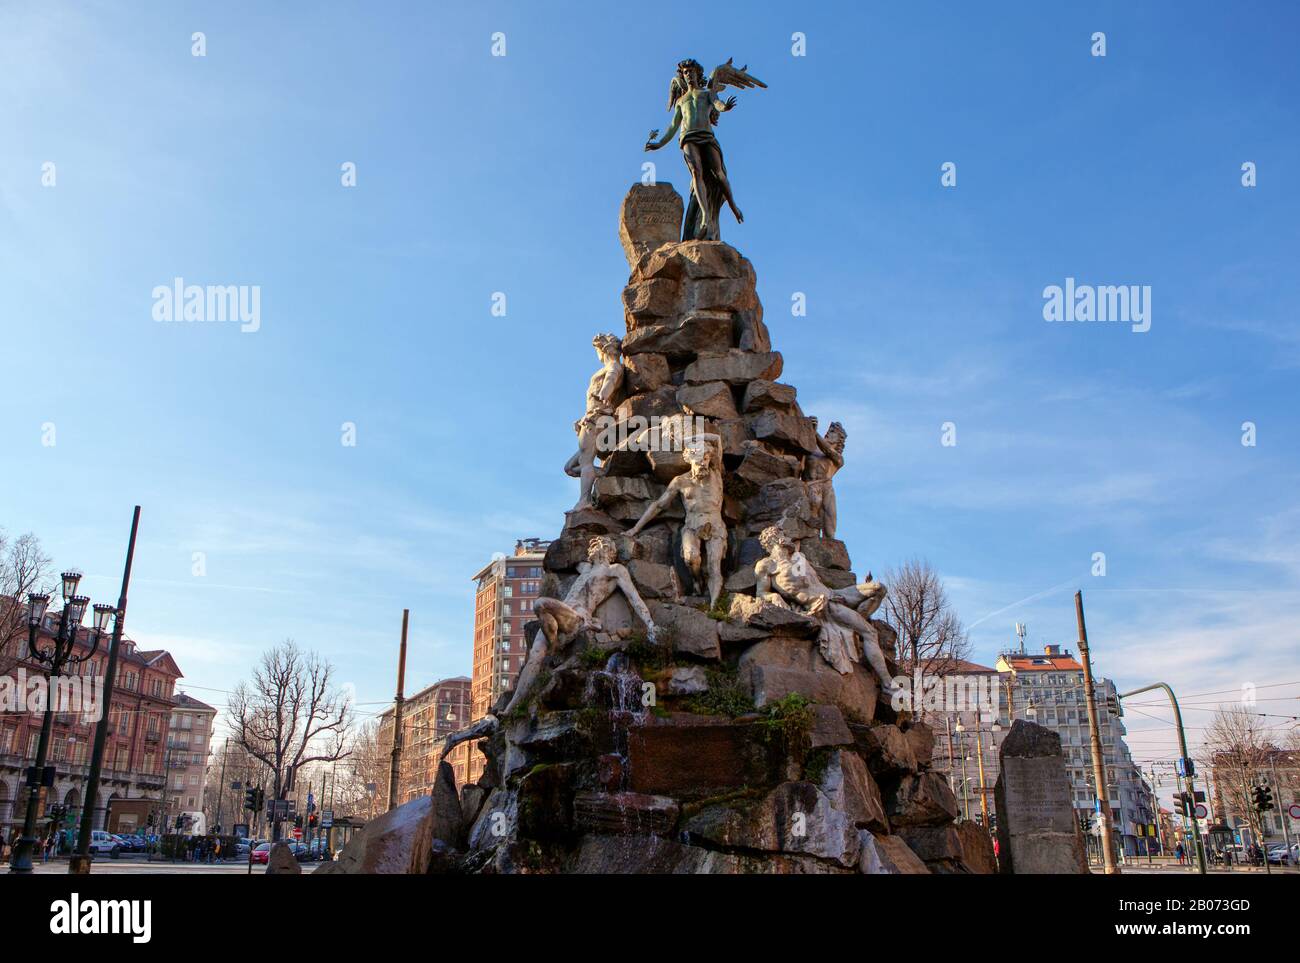 Dramatic monument of winged angel at Piazza statuto in Turin Stock Photo